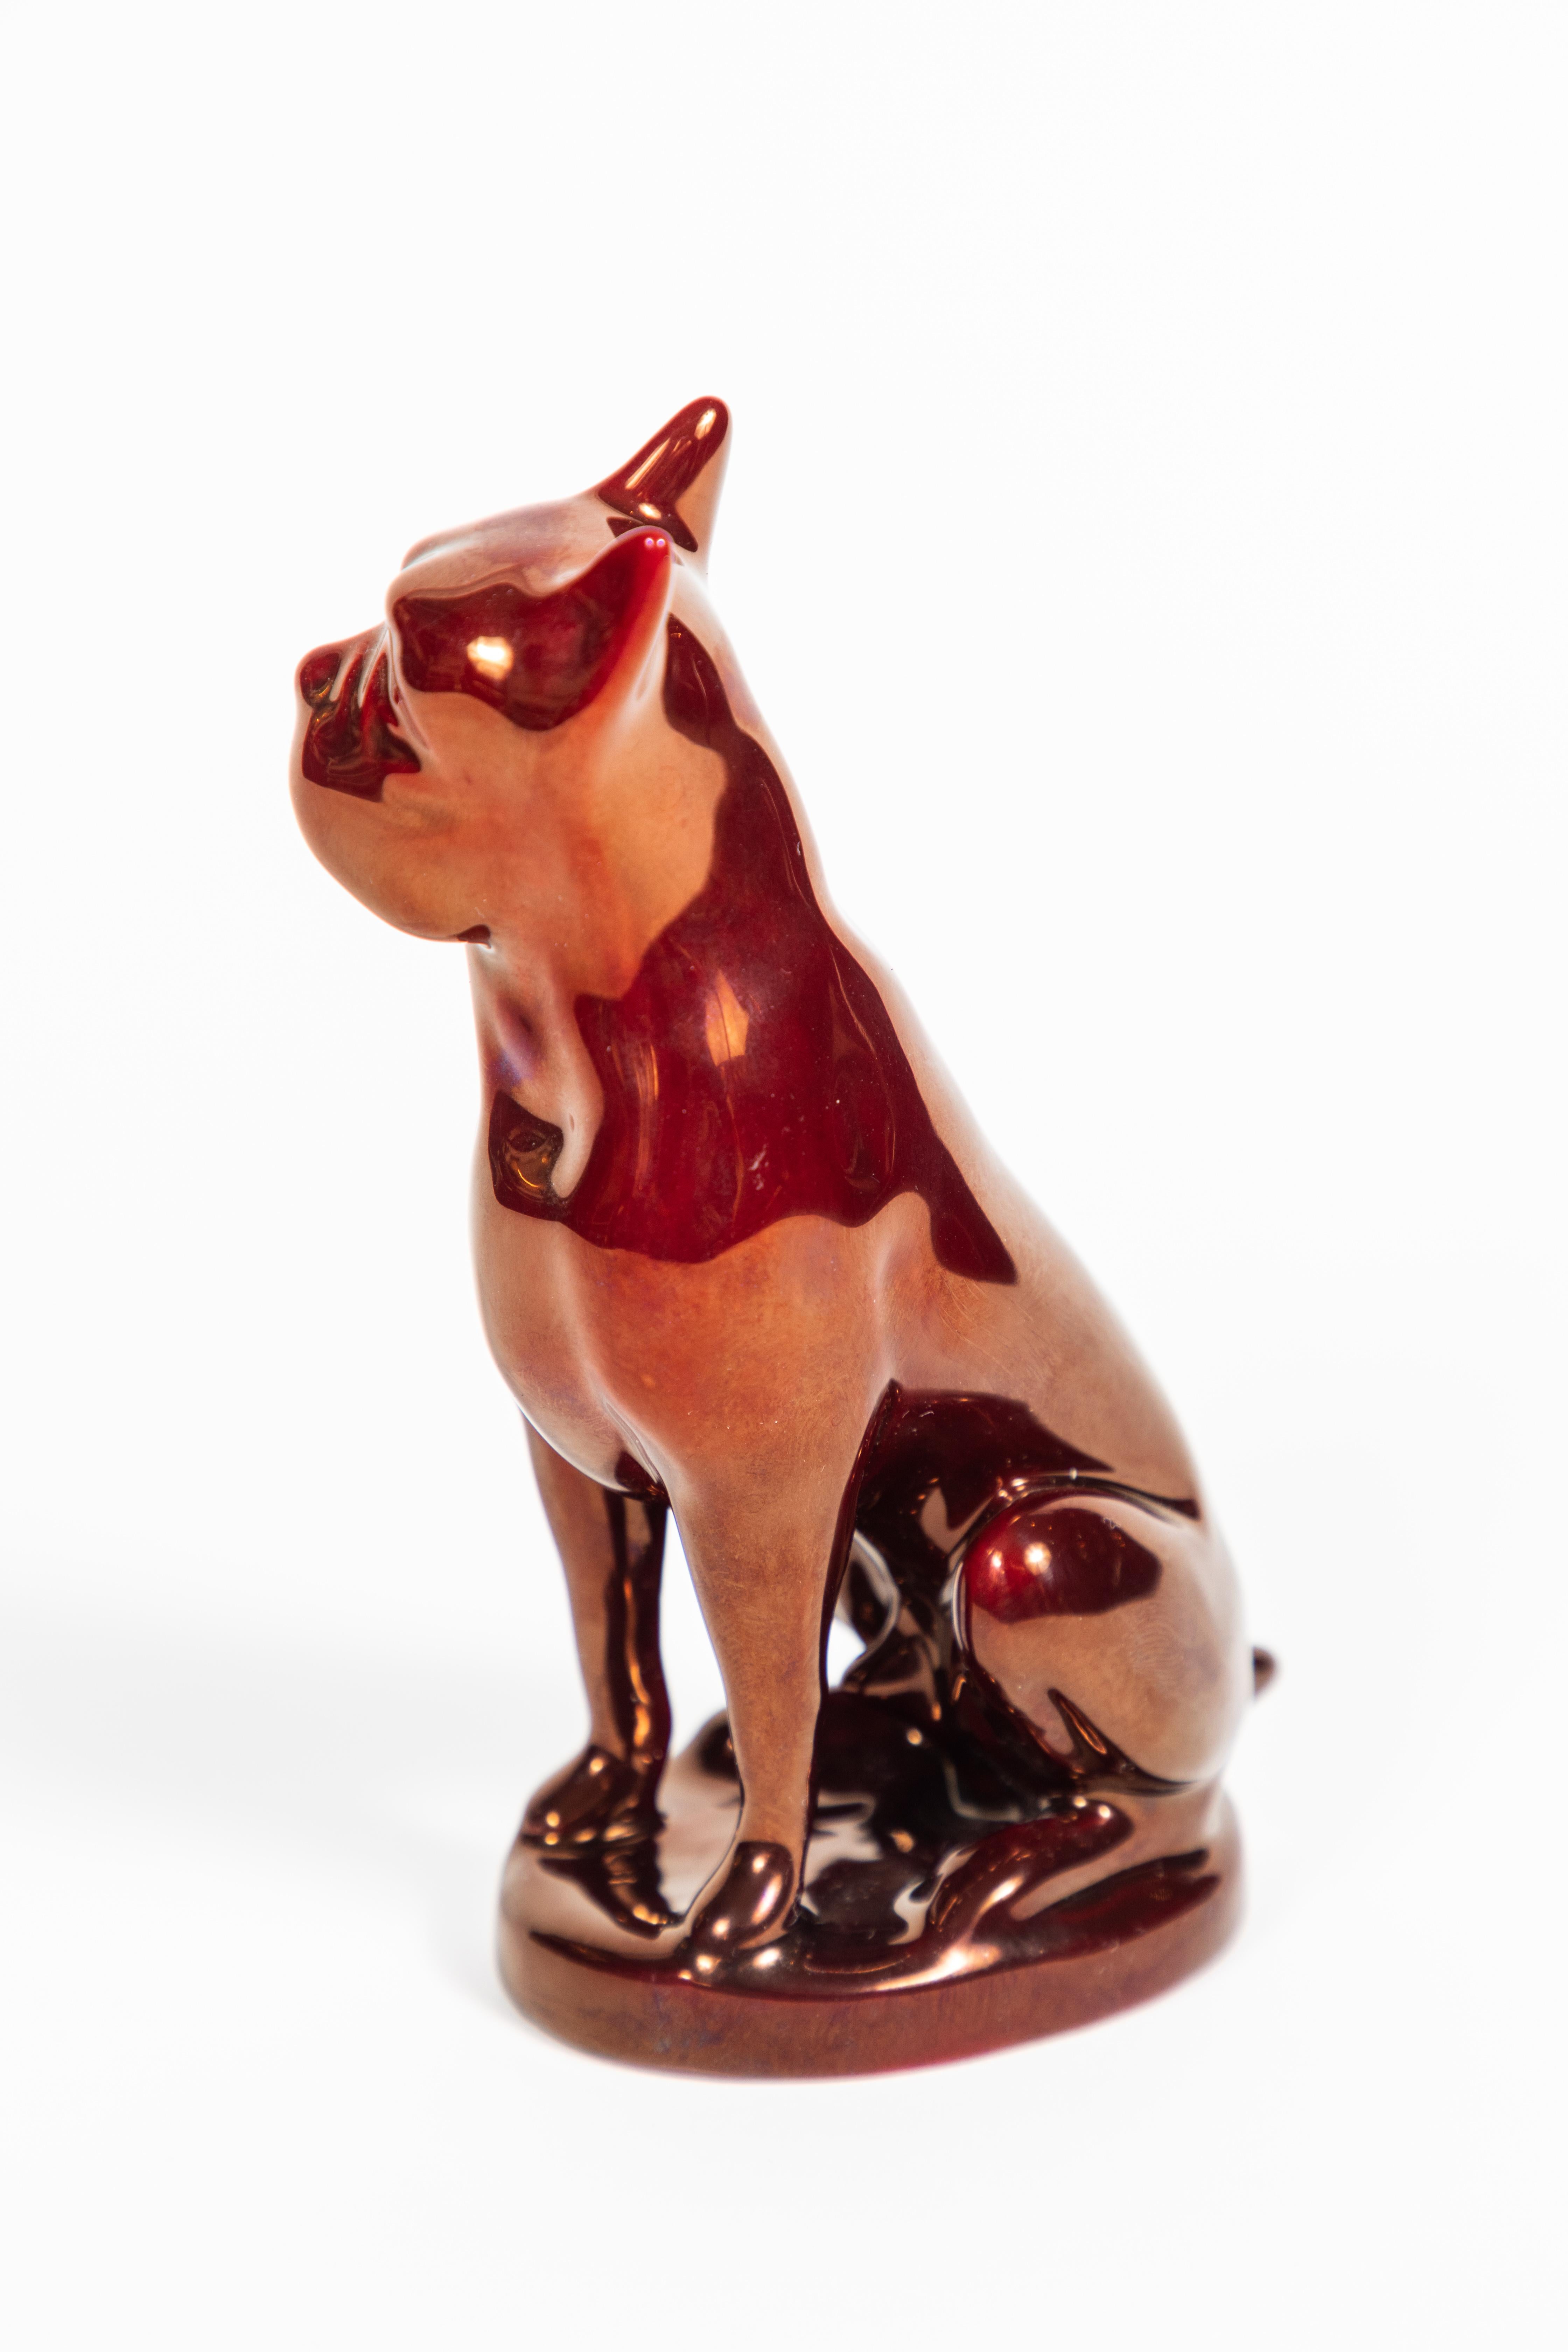 Hungarian Vintage Zsolnay Porcelain Dog with Iridescent Red Glaze, Hungary